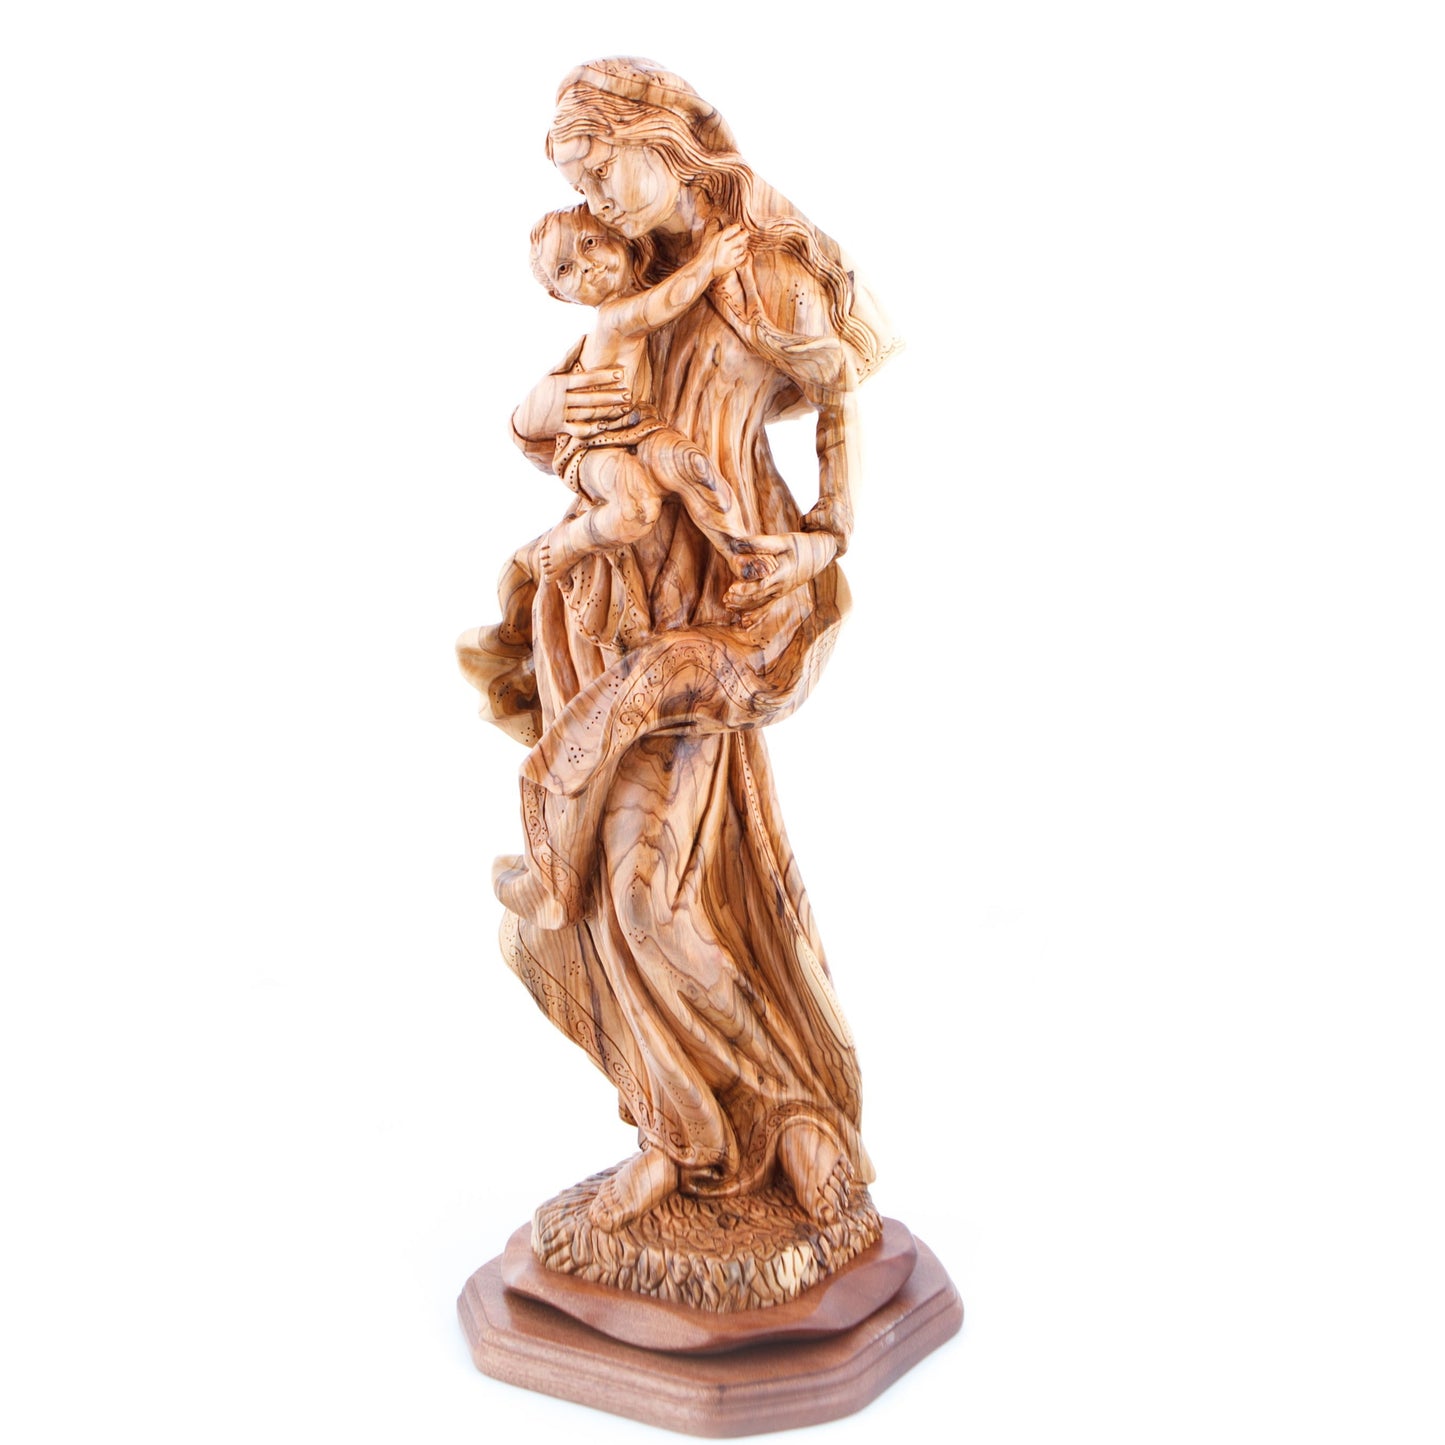 Virgin Mary Holding the Holy Child 20.5", Carved from the Holy Land Olive Wood